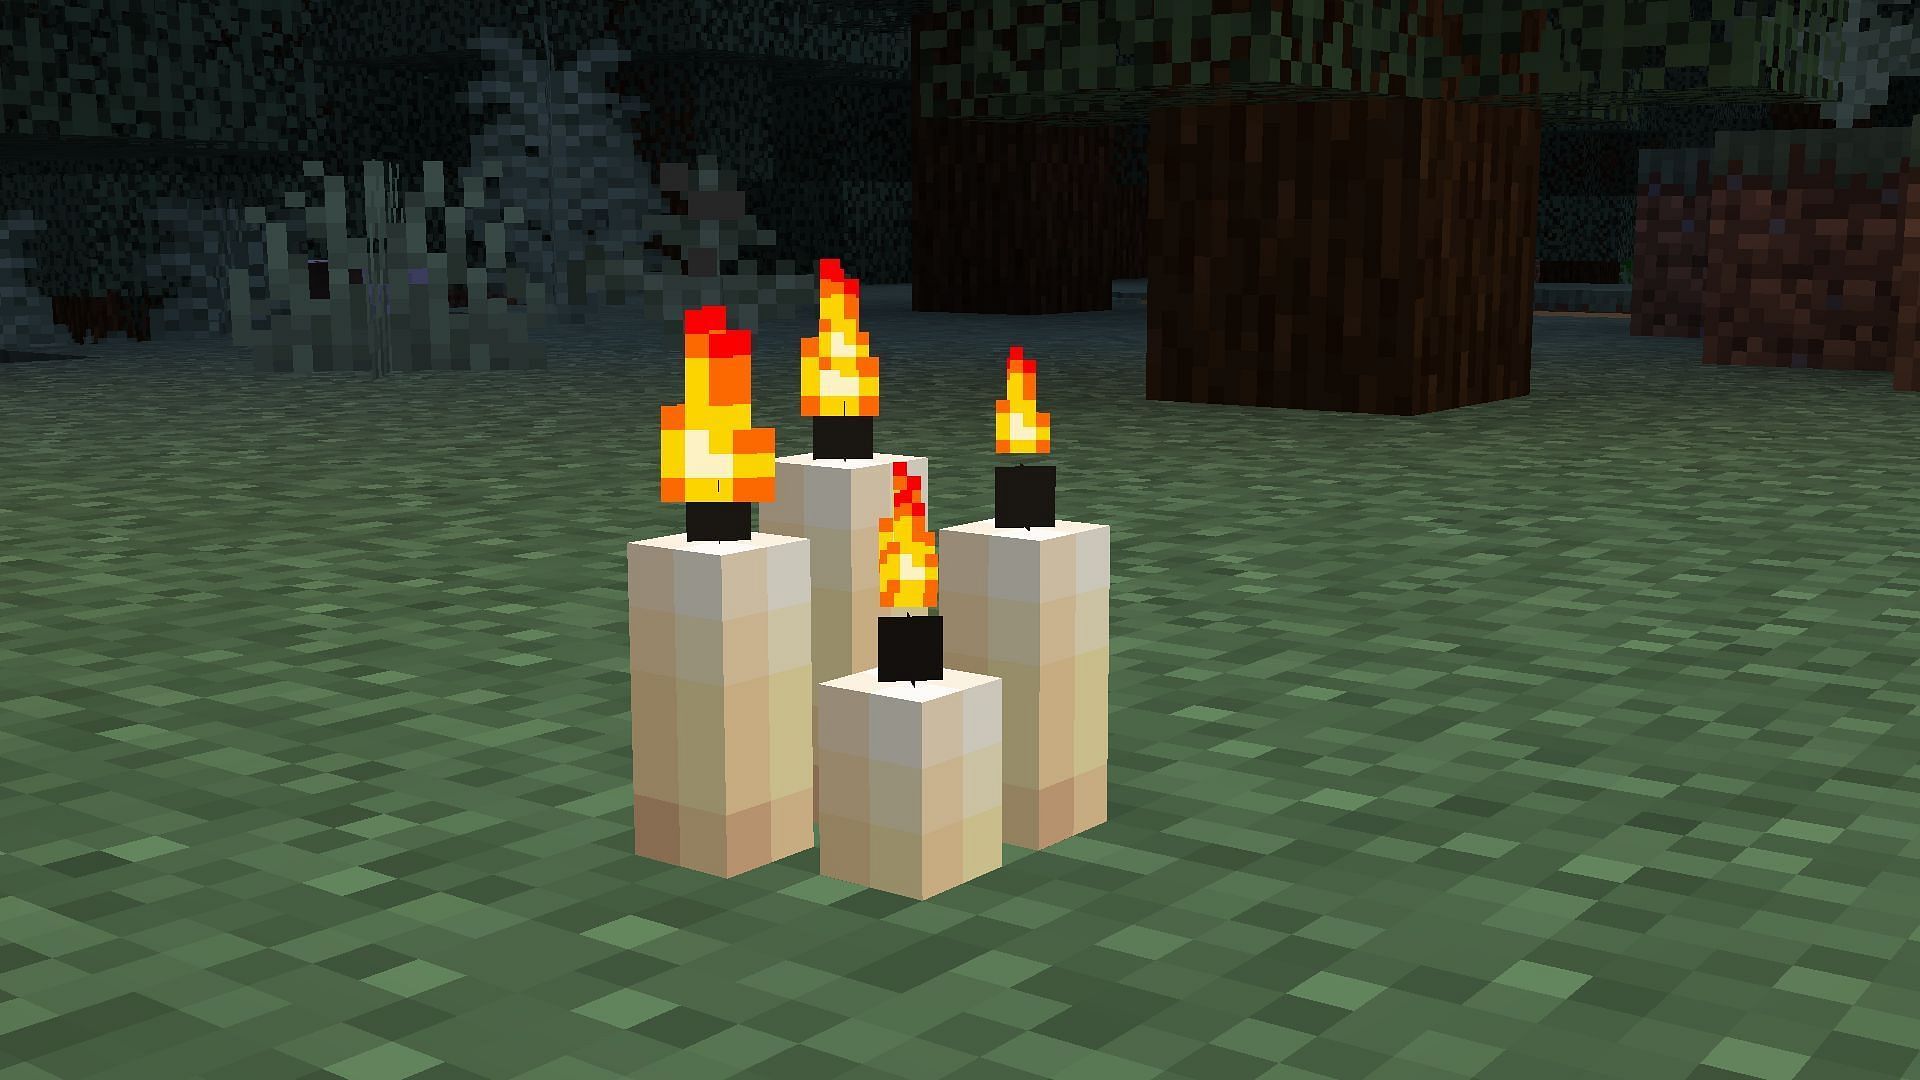 Players can place anywhere between one and four candles on a single block in Minecraft (Image via Mojang)